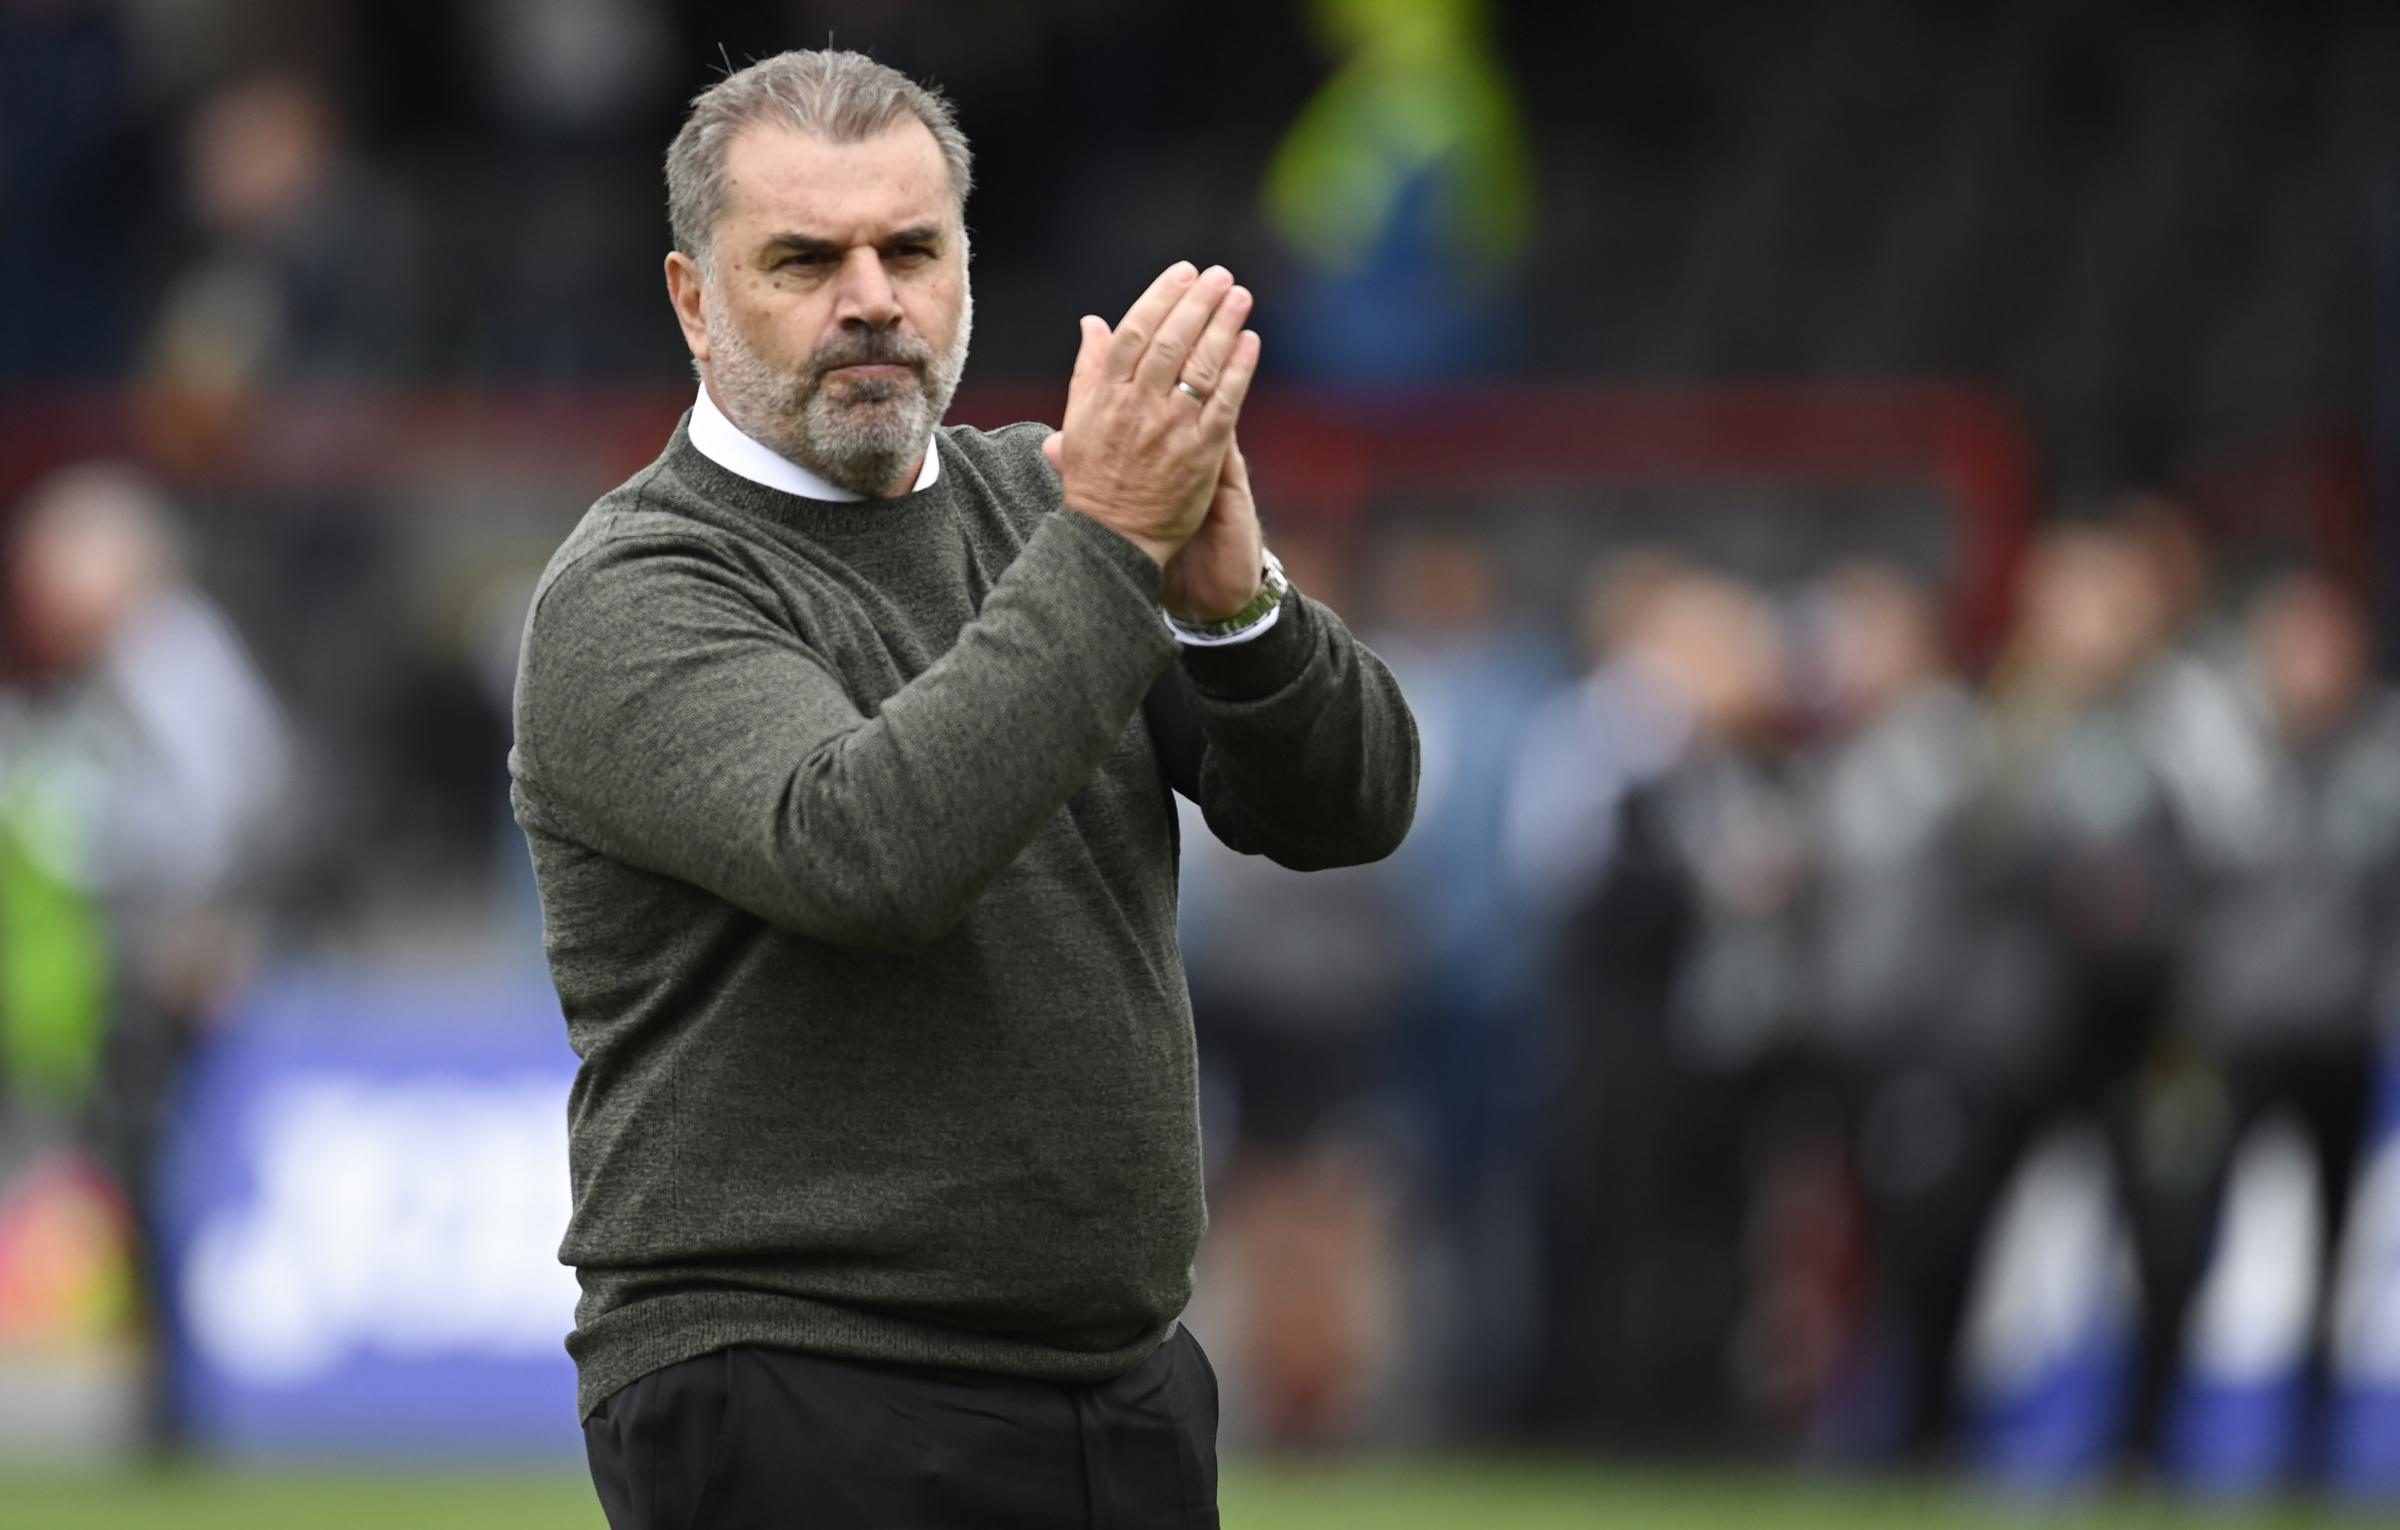 Ange Postecoglou says Celtic let fans down as they fell way below standards in St Mirren defeat